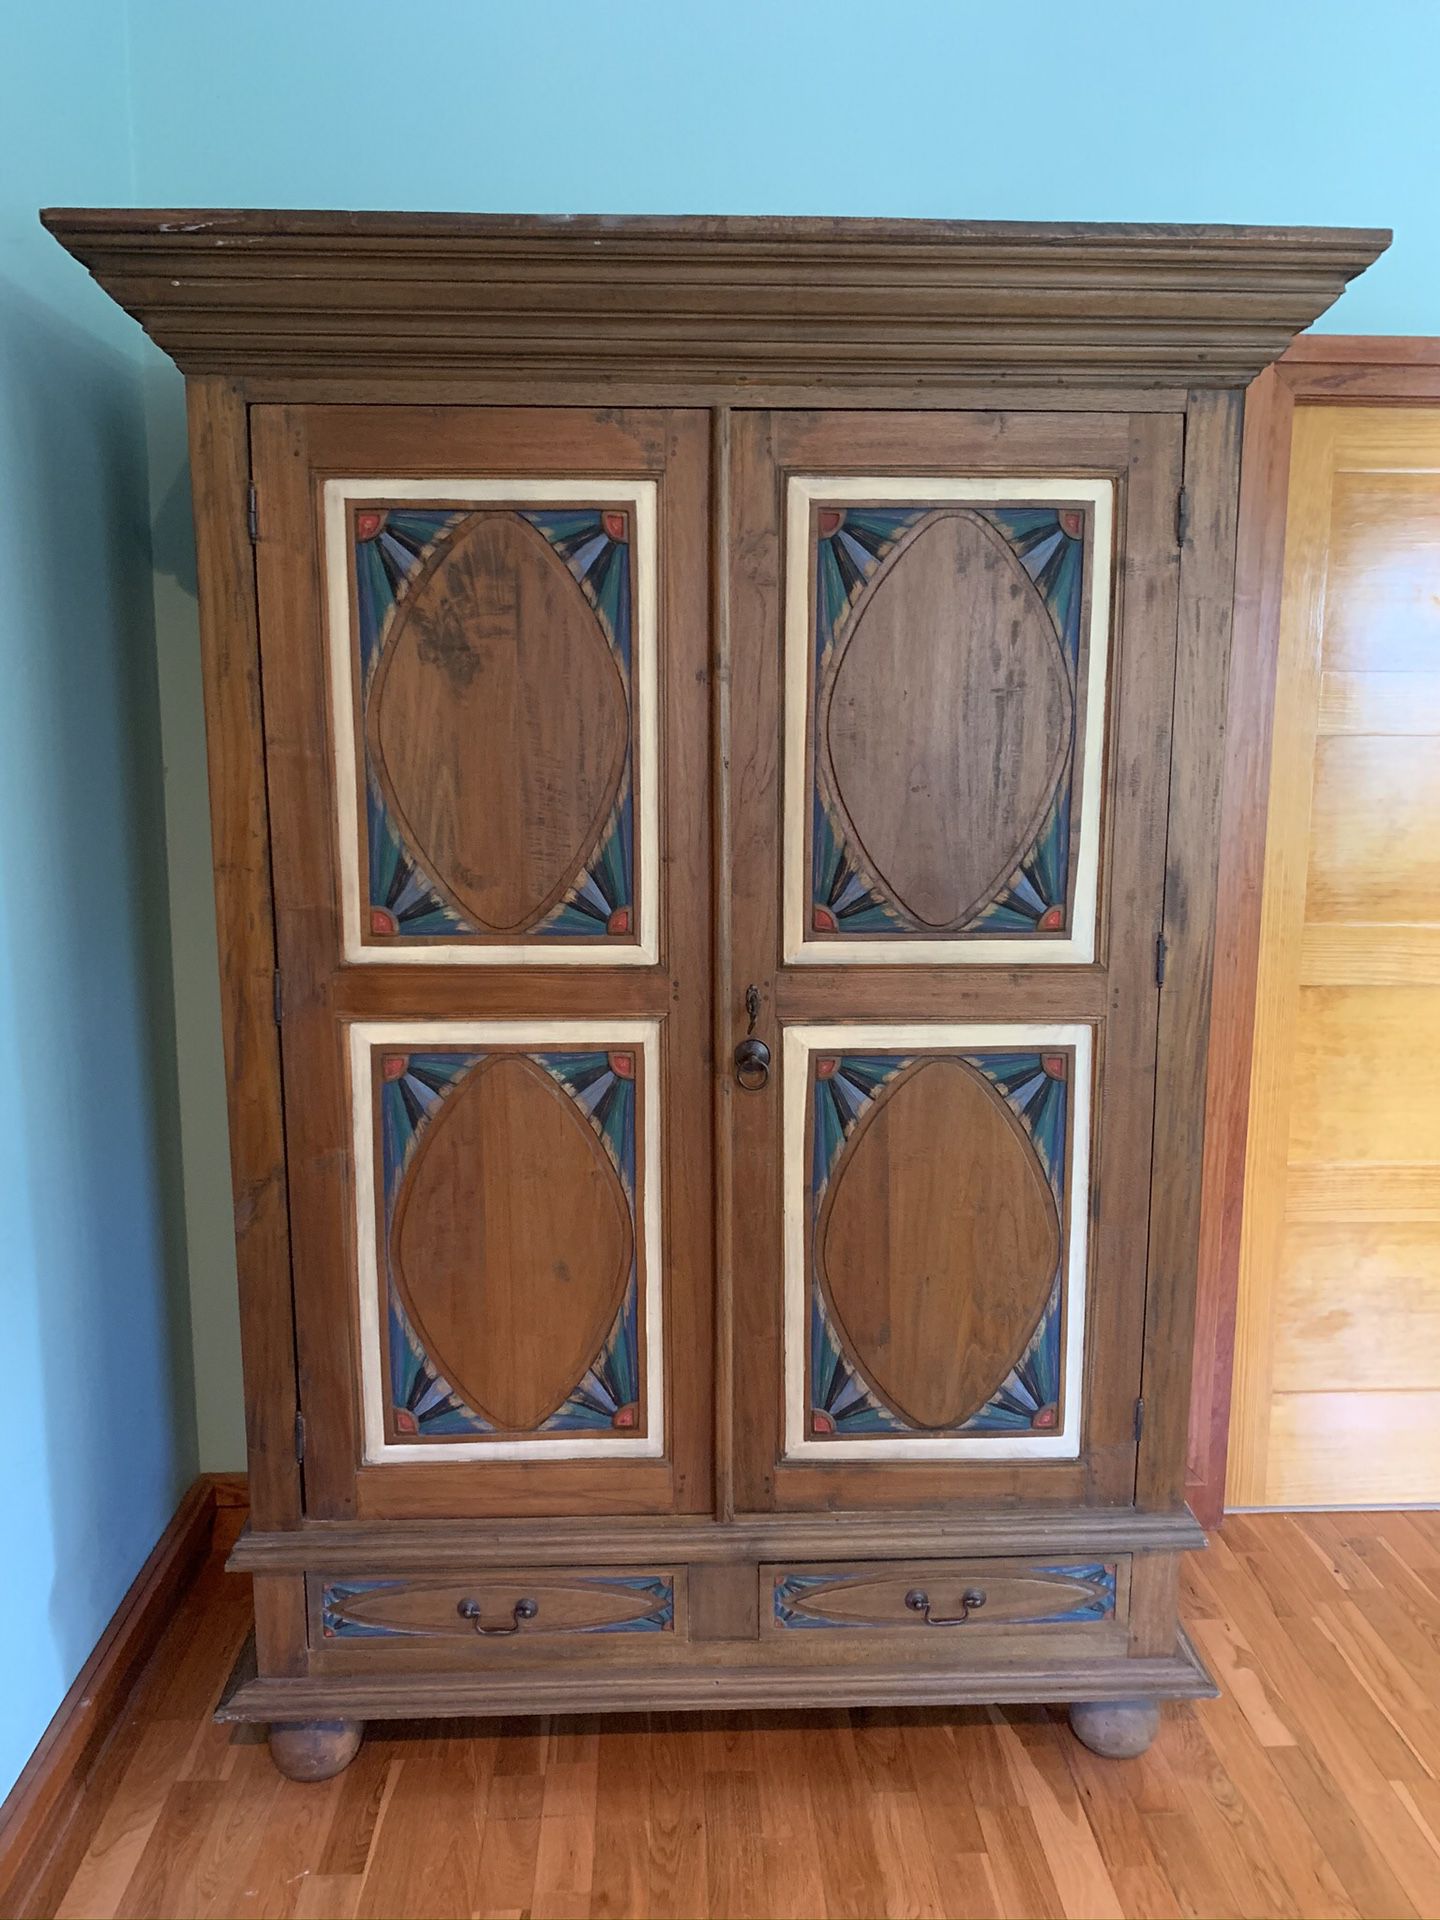 Solid Wood Double Armoire Cabinet with painted decorative accents